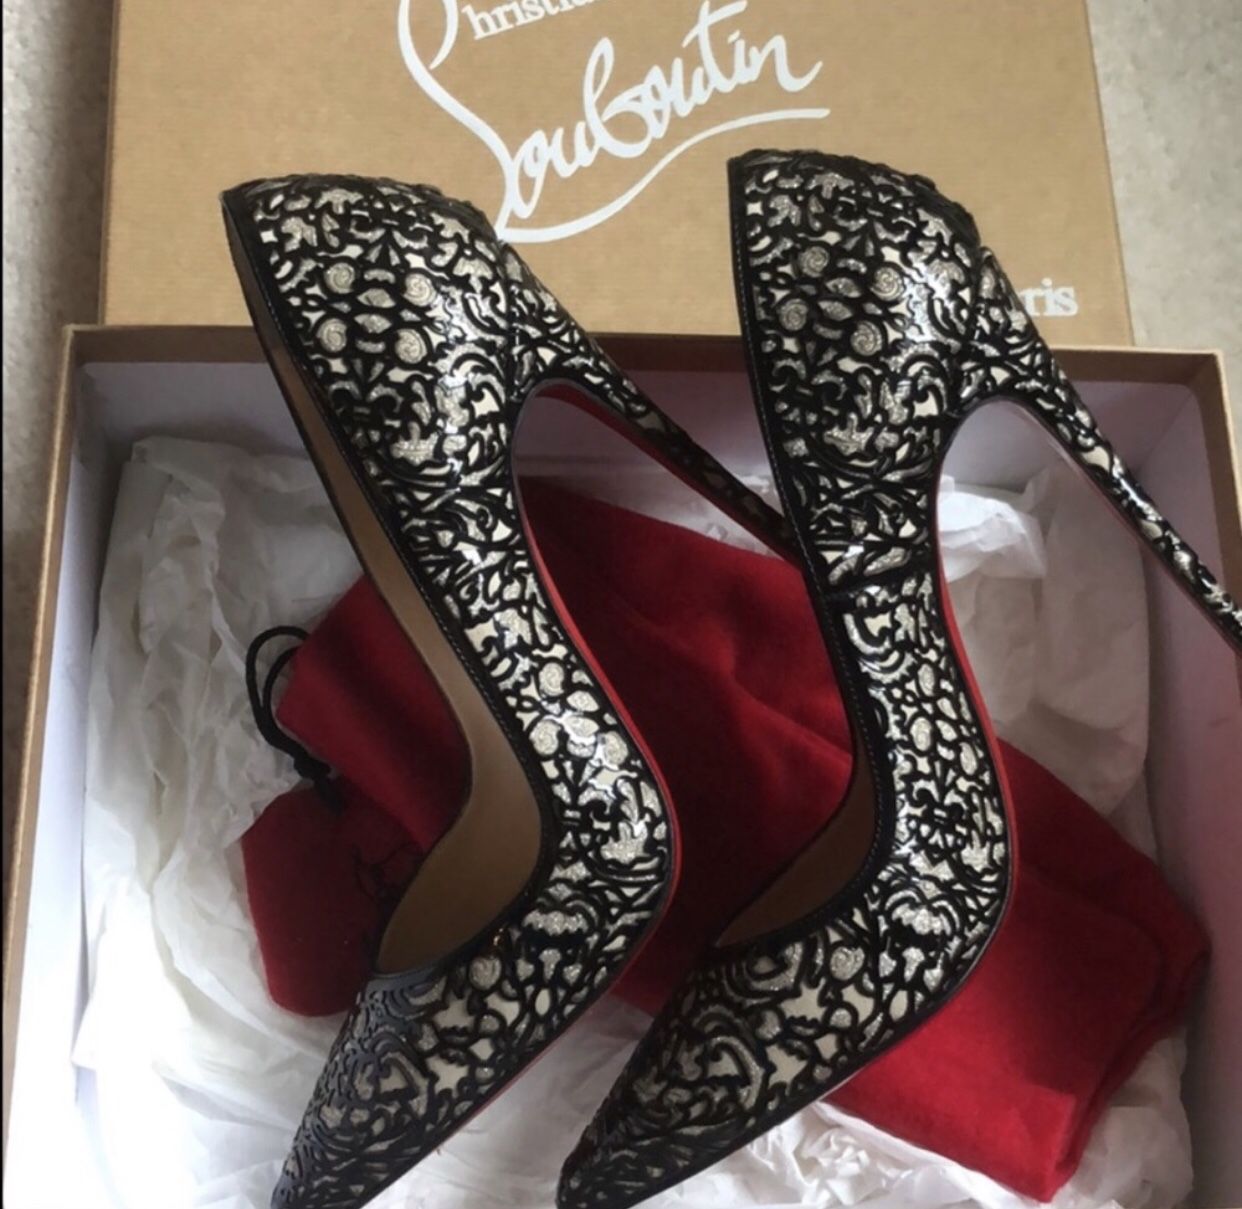 Christian Louboutin size 10 (40) So Pretty Pigalle heels